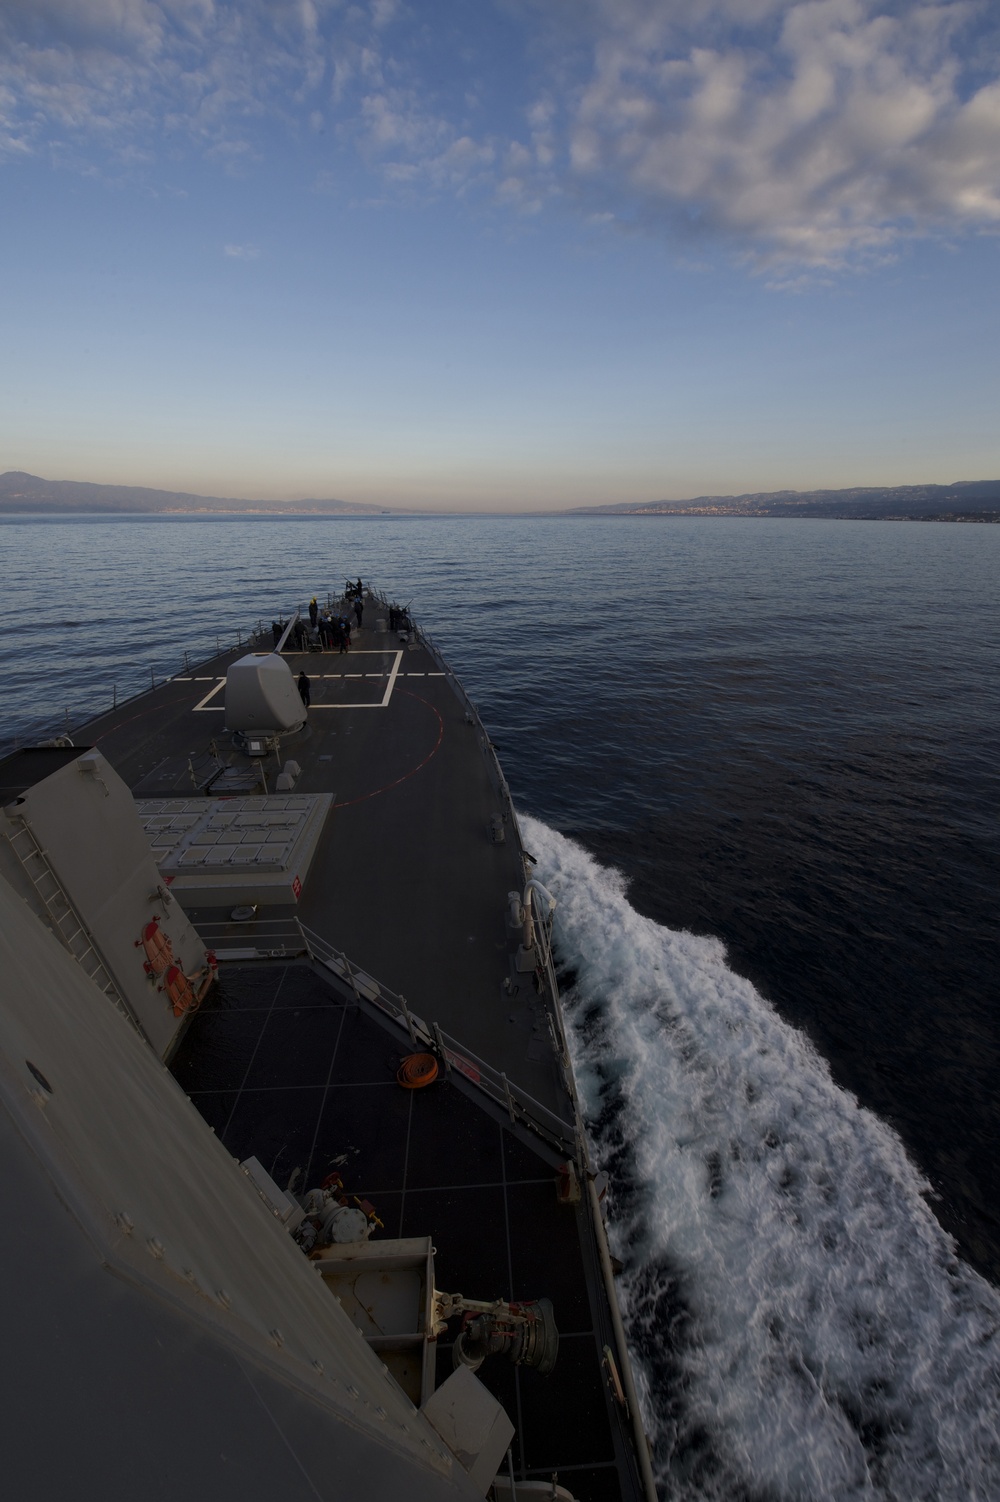 USS Carney transits through the Strait of Messina